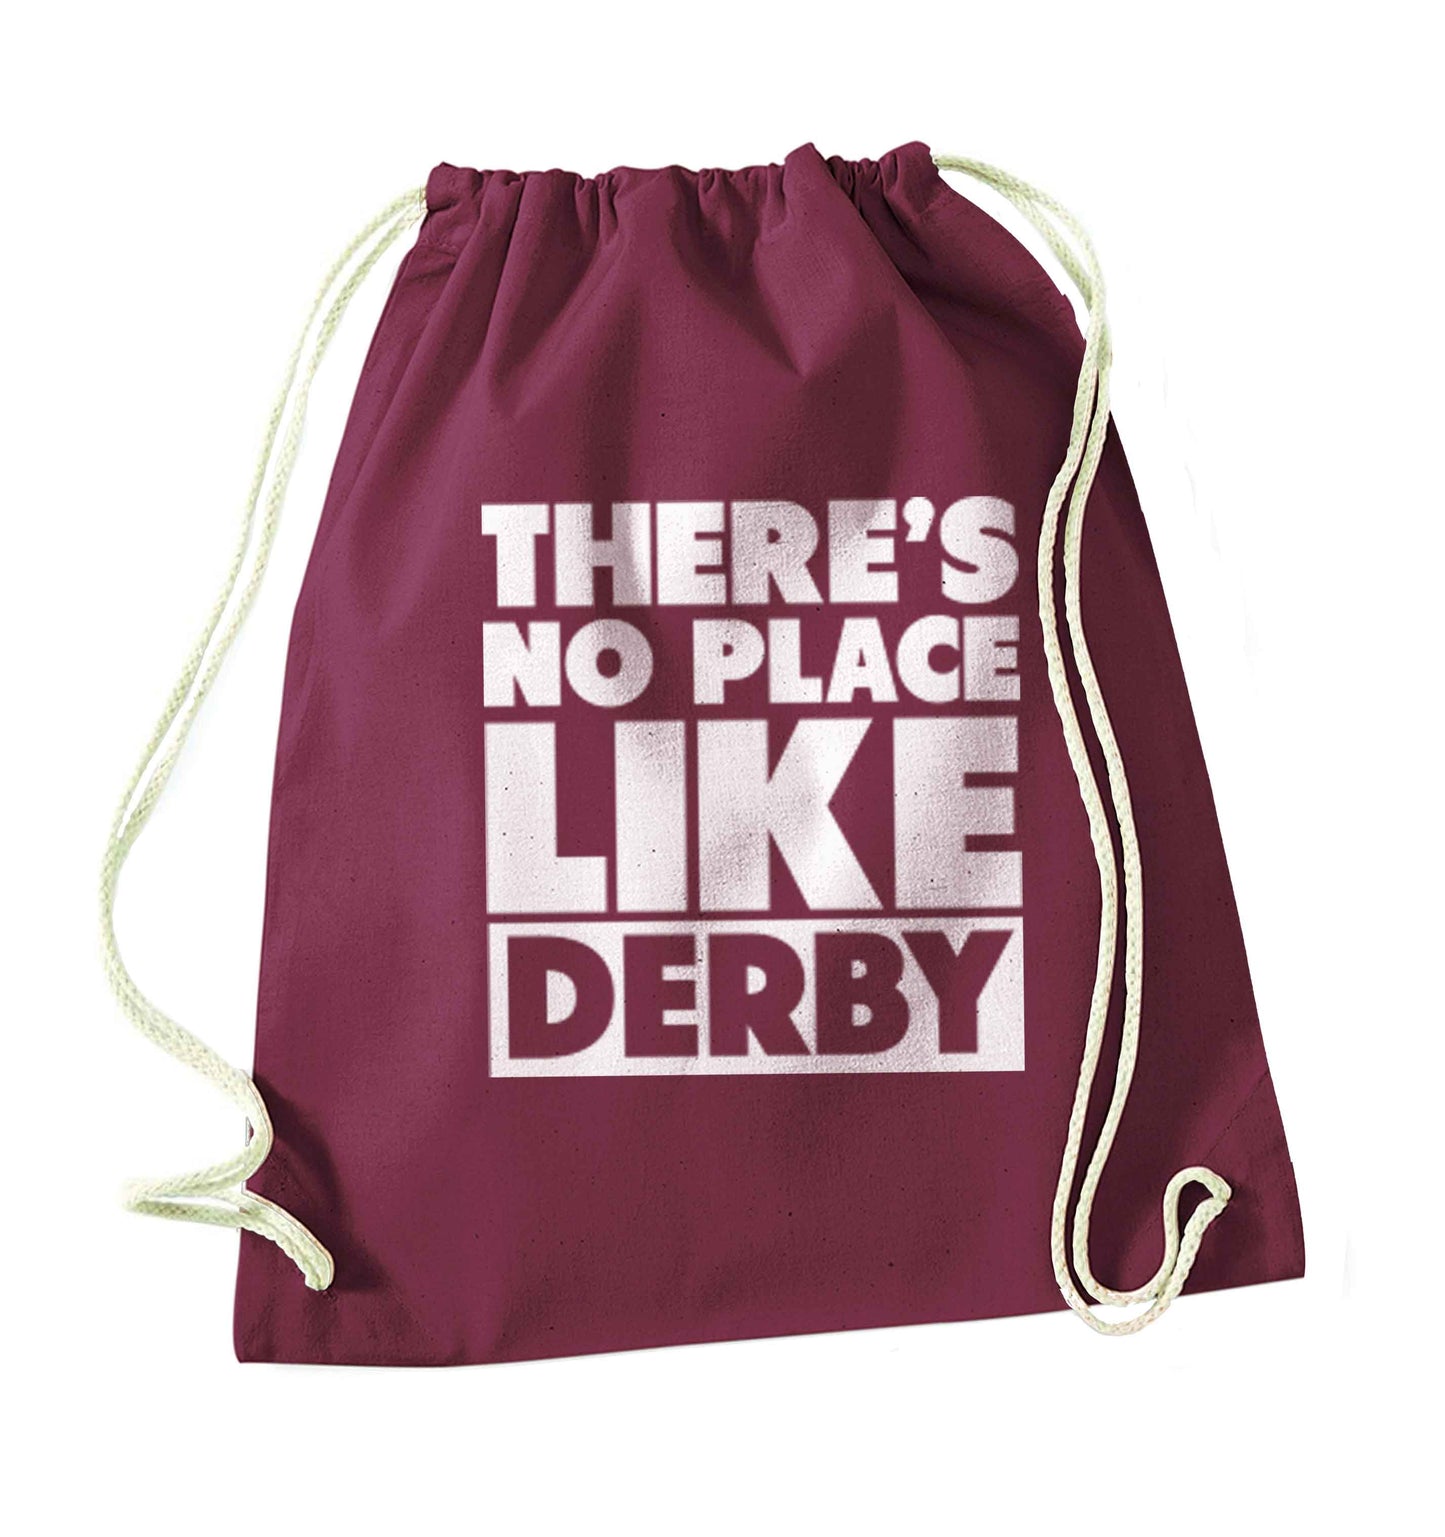 There's no place like Derby maroon drawstring bag